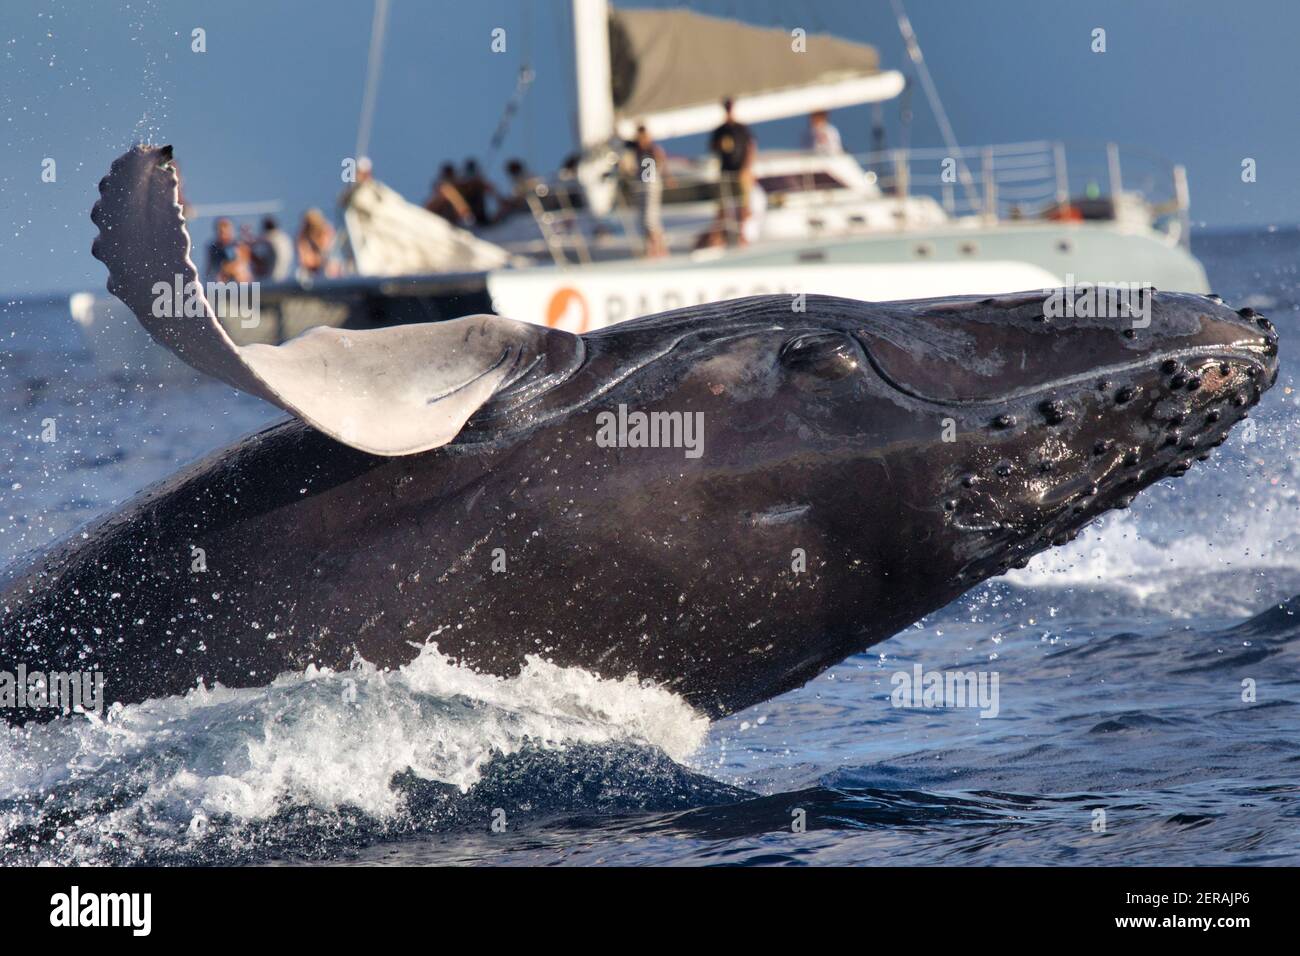 Huge humpback whales breaching very close and unexpectantly in front of a whale watch boat. Stock Photo